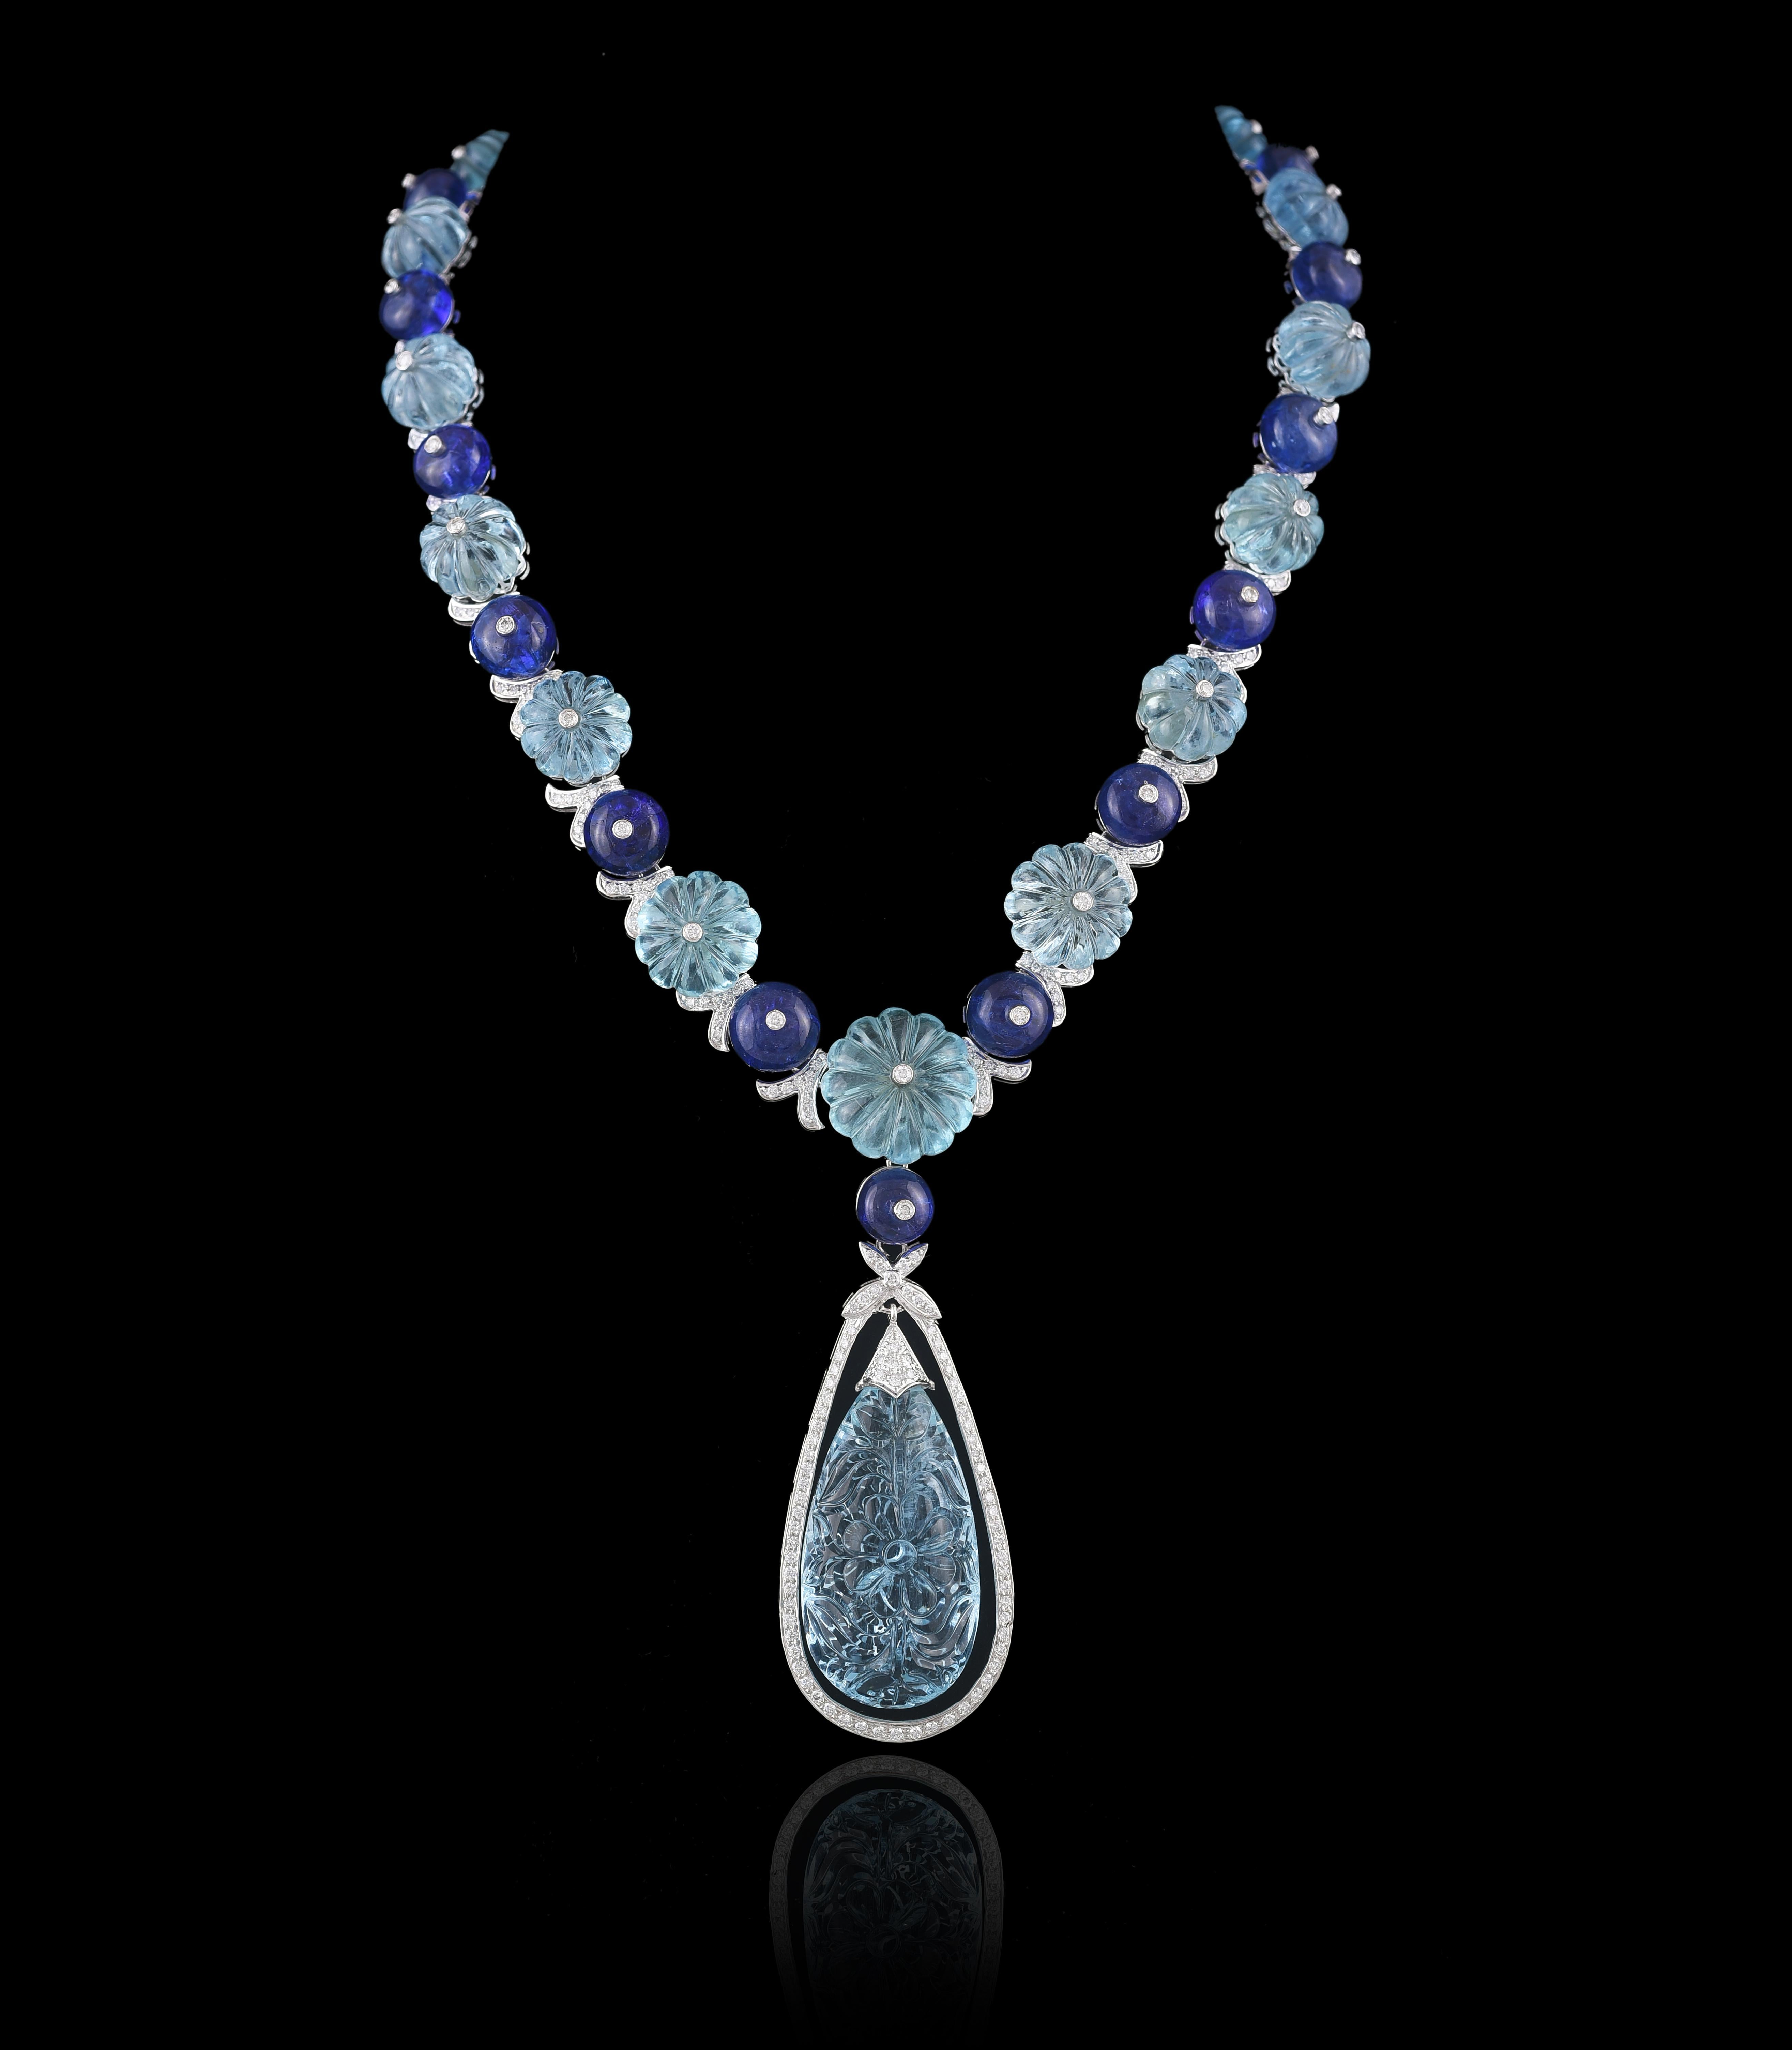 A stunning, one of a kind carved Aquamarine, Tanzanite Beads & Diamonds Necklace Set in 18K gold. The Set consists of a necklace and a matching pair of Earrings. The Aquamarine is hand- carved in our own workshop, and completely natural without any